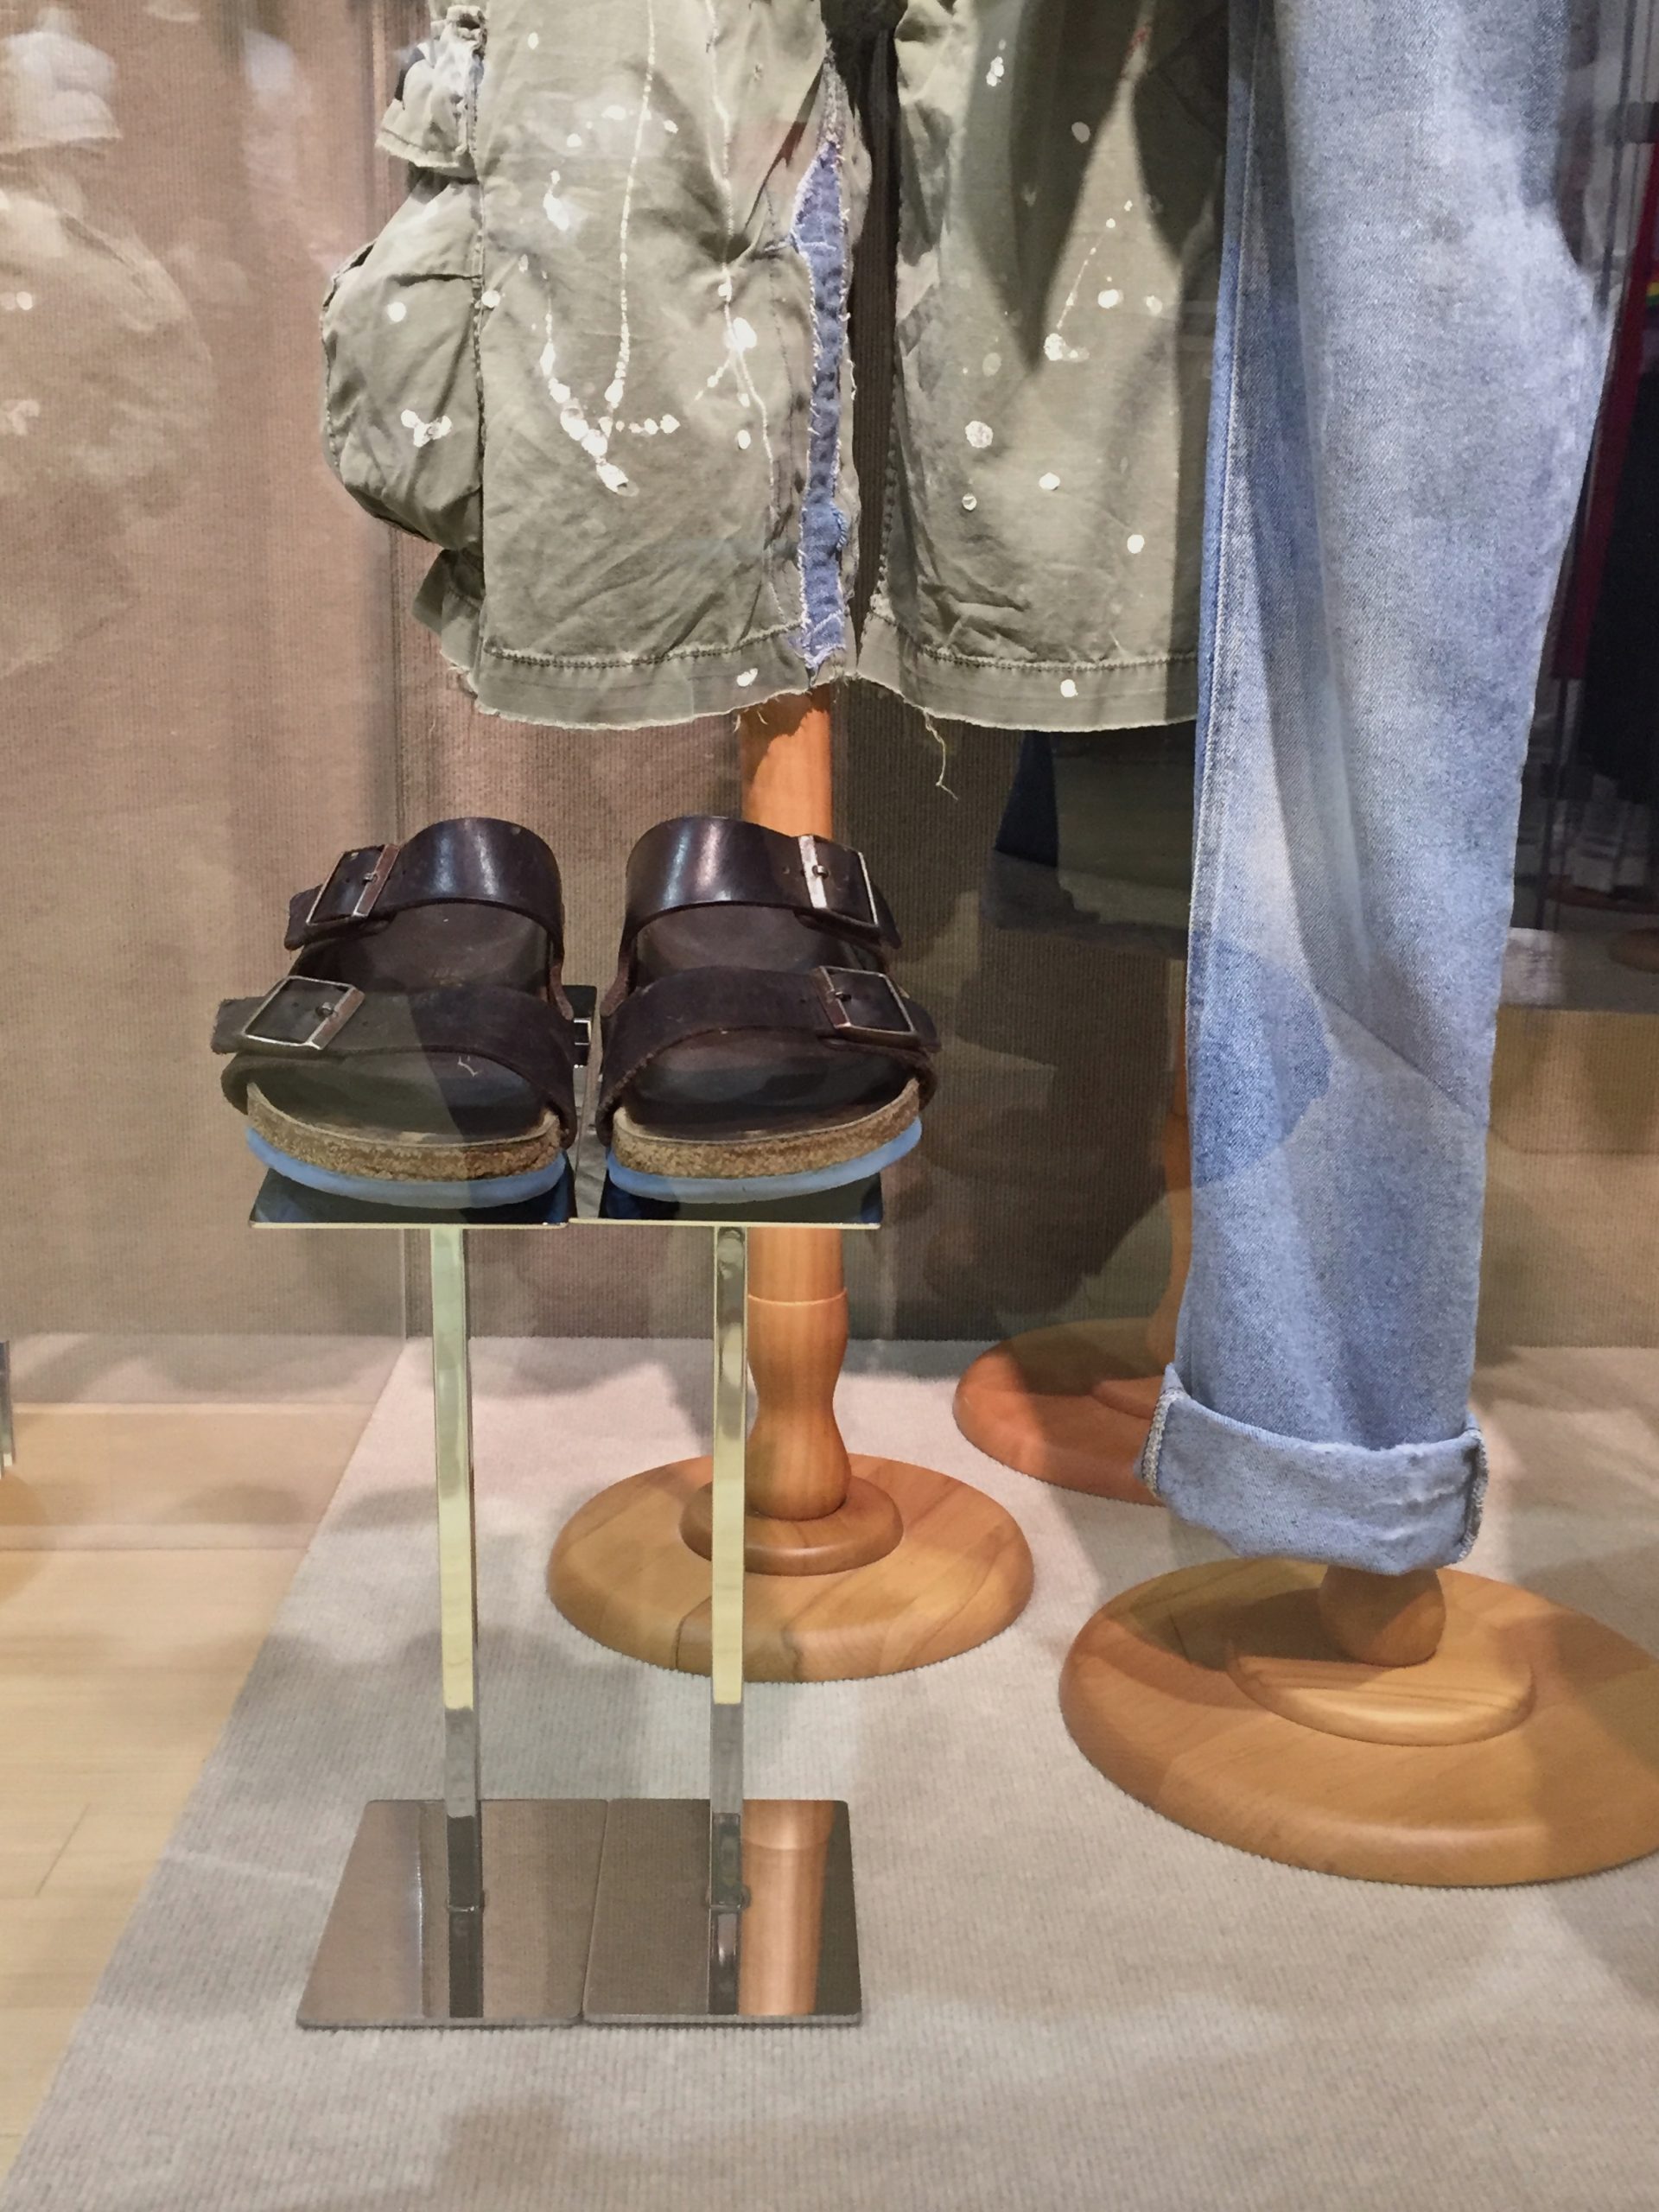 Close-up of Birkenstocks in the "Fitting the Stereotype" case.